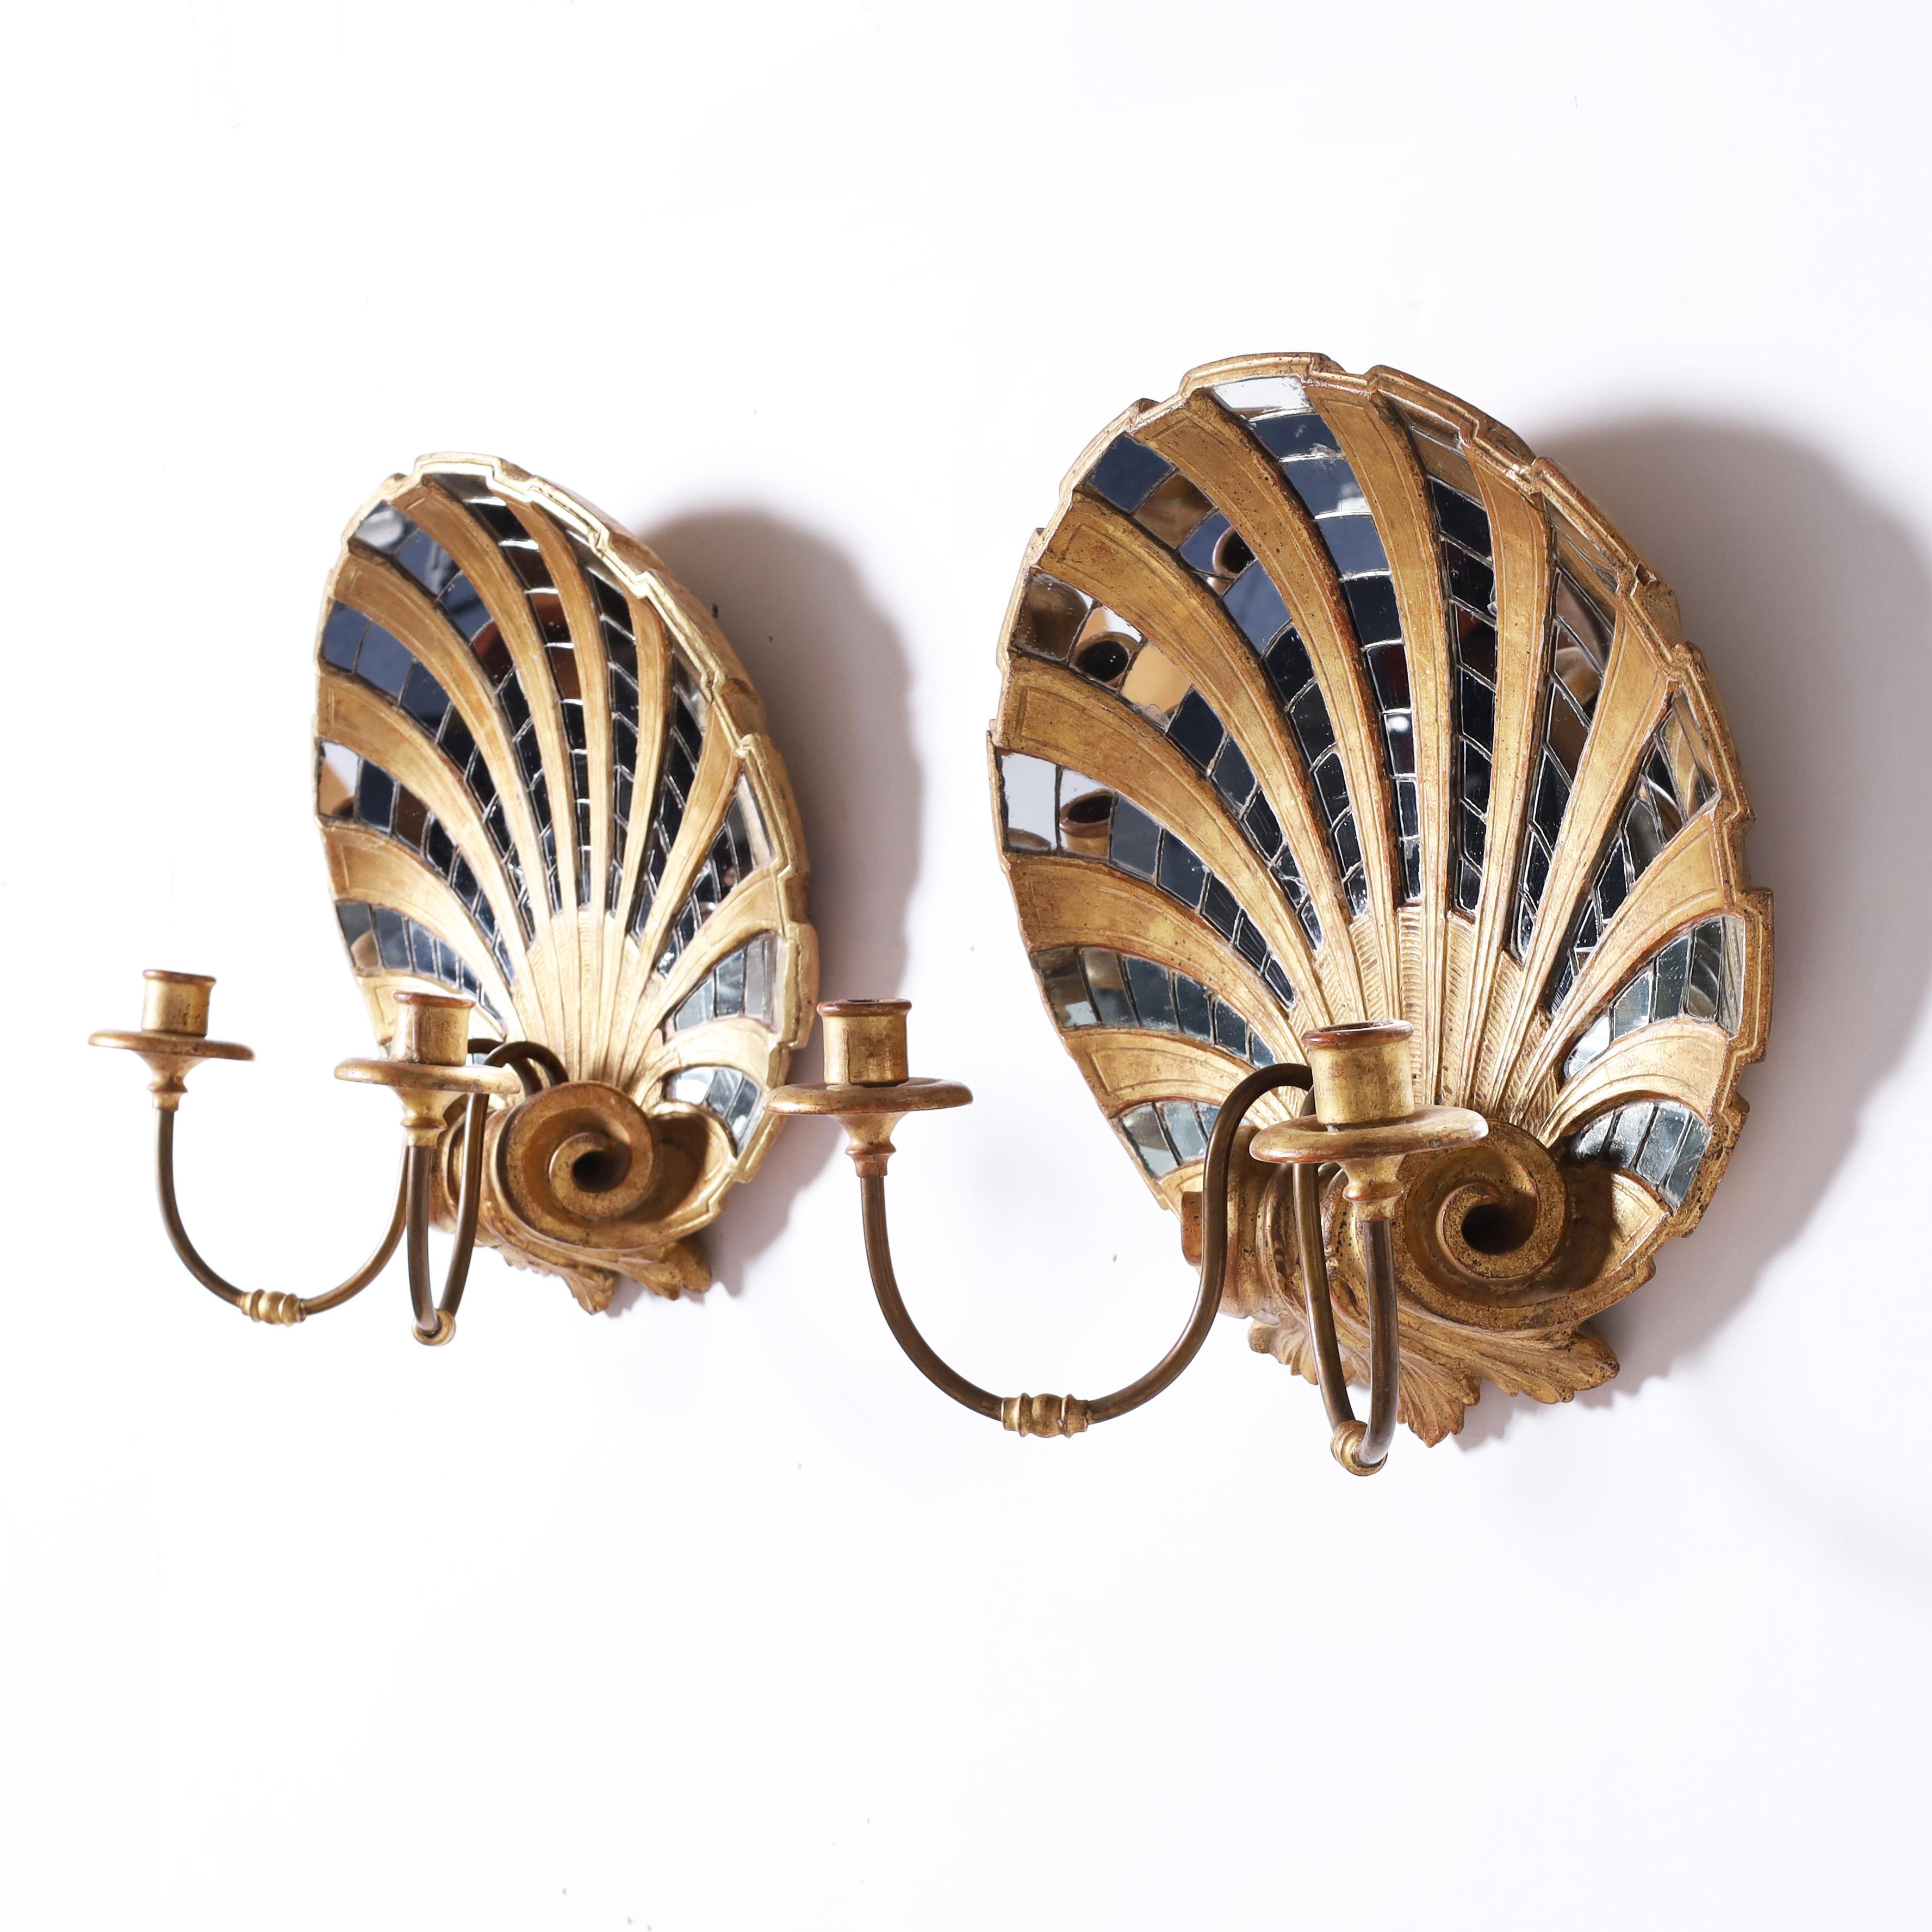 Neoclassical Pair of Antique Italian Mirrored Seashell Wall Sconces